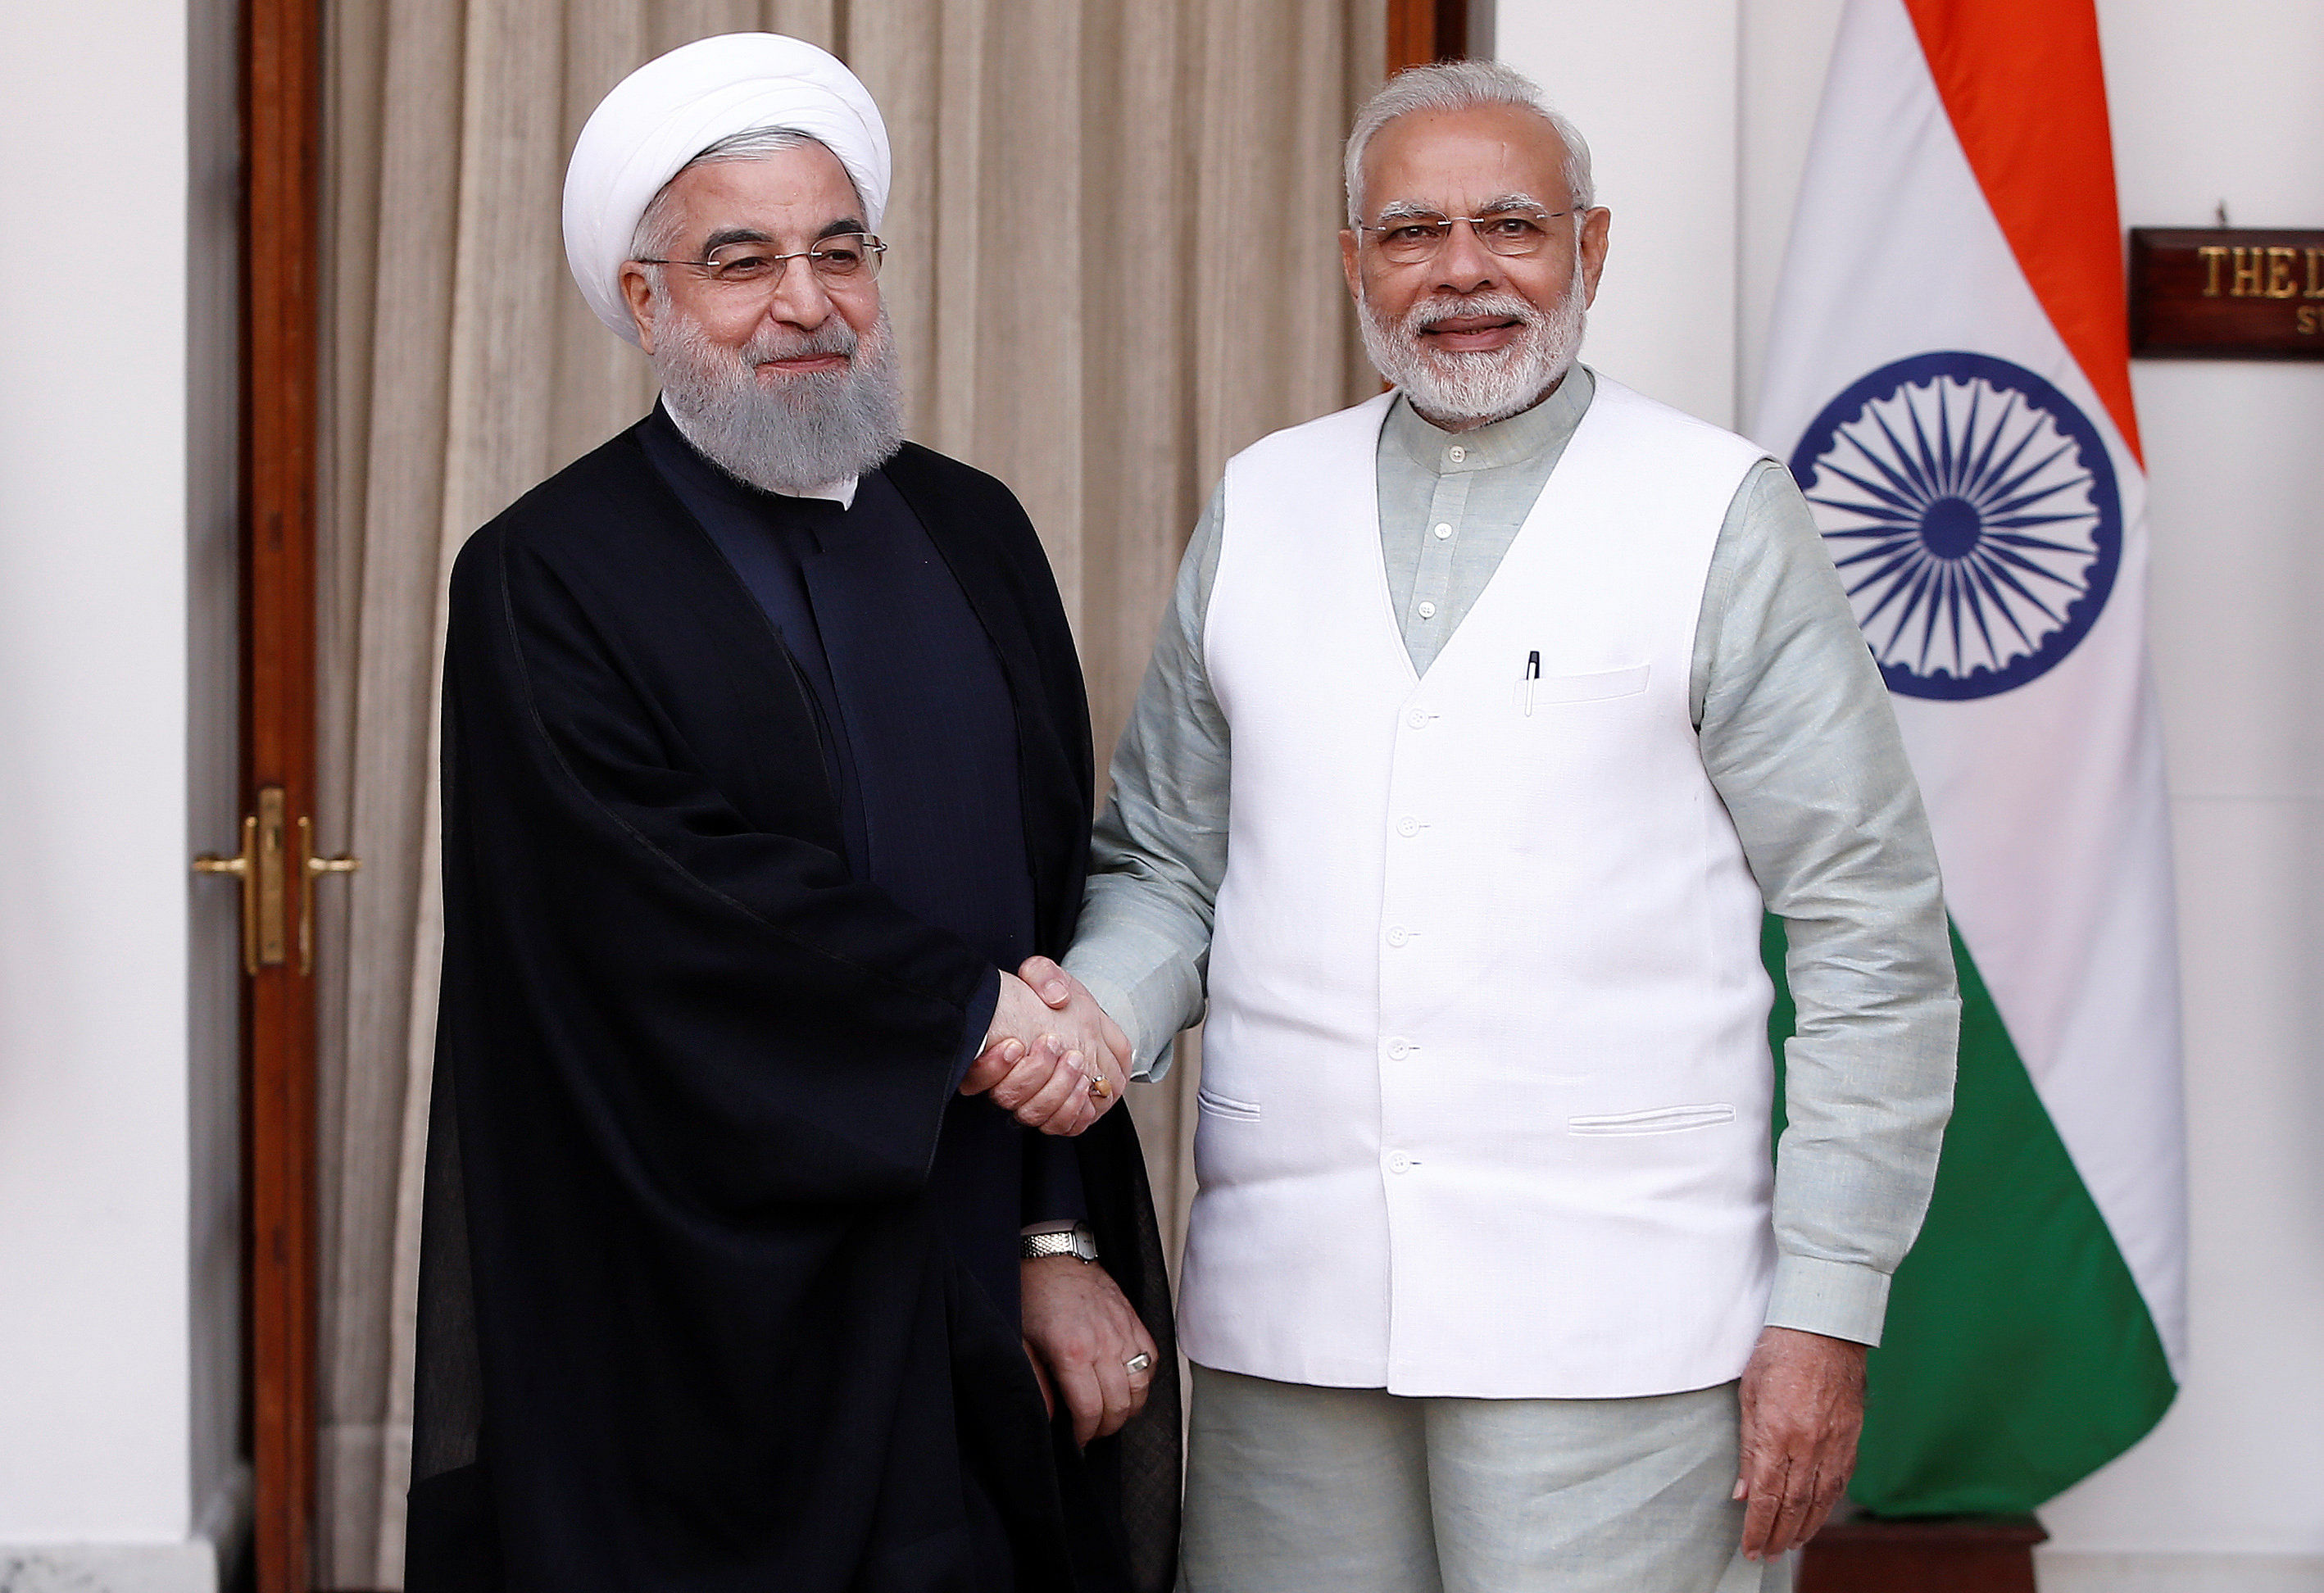 India on Wednesday came out in support of Iran after the Trump administration announced it would withdraw from the landmark nuclear deal with Tehran.